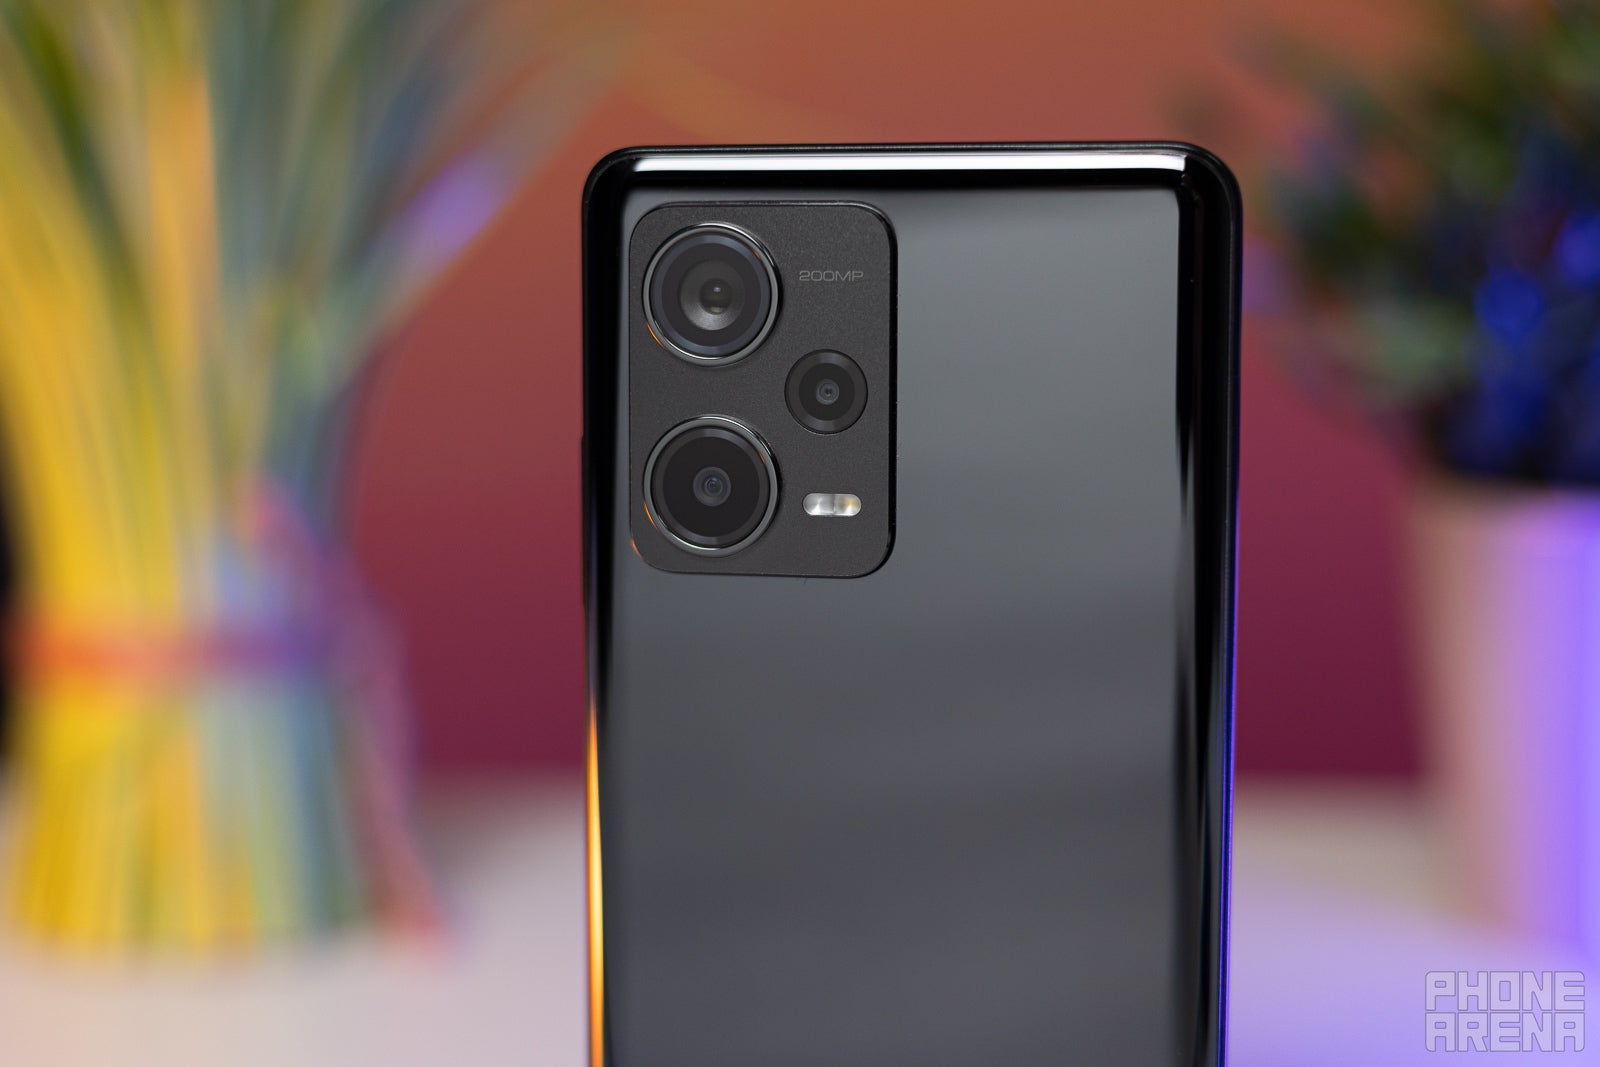 (Image Credit - PhoneArena) The Redmi Note 12 Explorer comes with a 200MP main camera - Insane &quot;Explorer Edition&quot; phone brings 10X faster charging than Galaxy S22 or iPhone 14: we test world’s fastest 210W charging